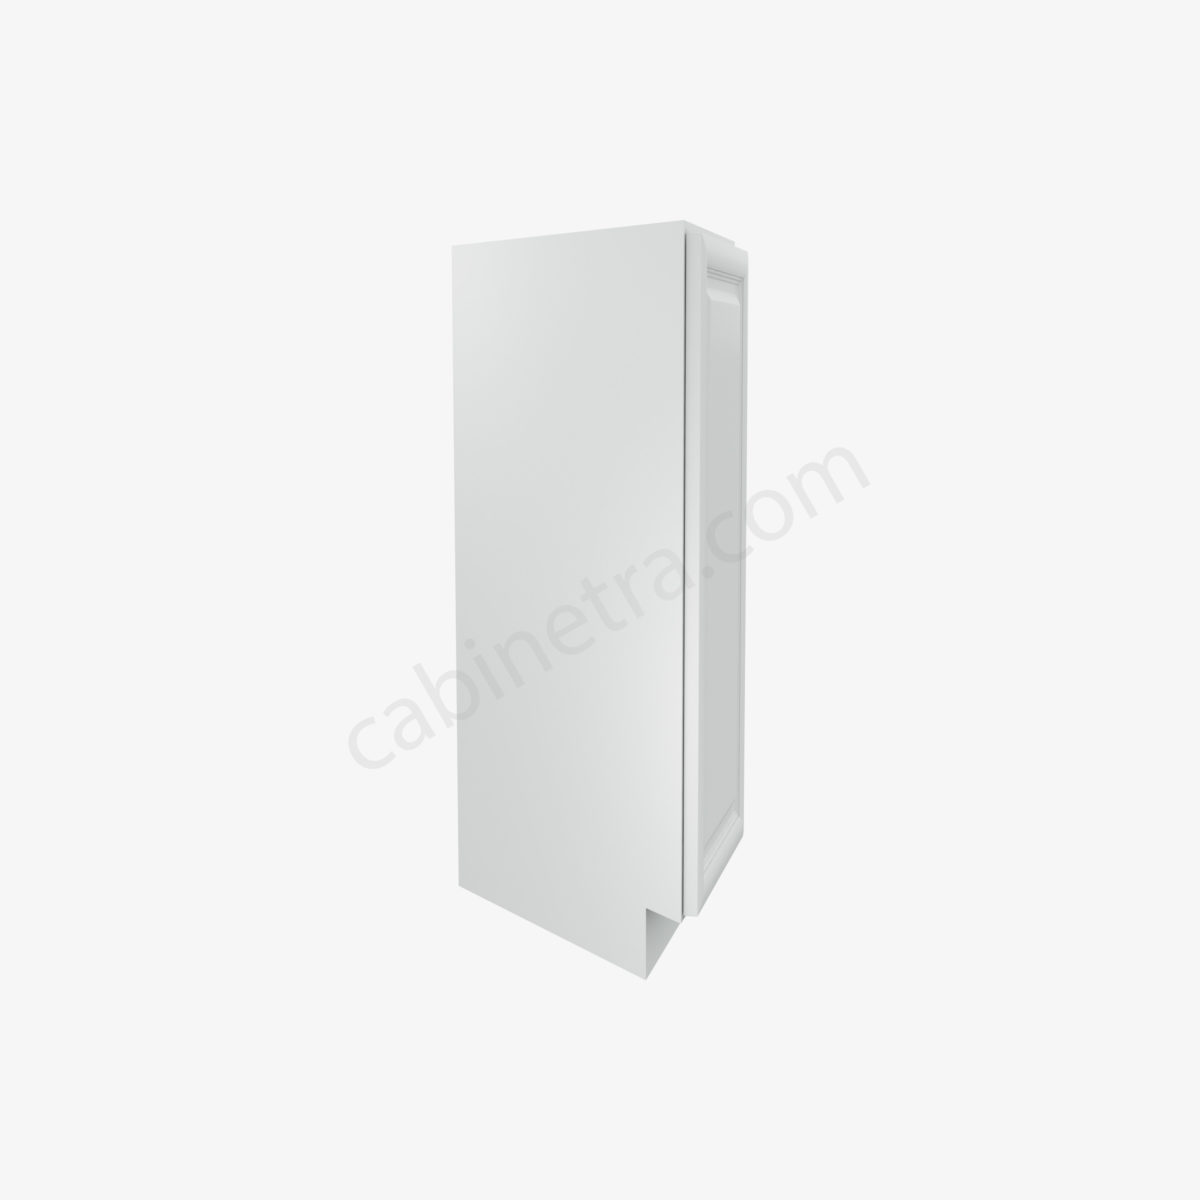 KW BBLC45 48 42W 4  Forevermark K White Cabinetra scaled